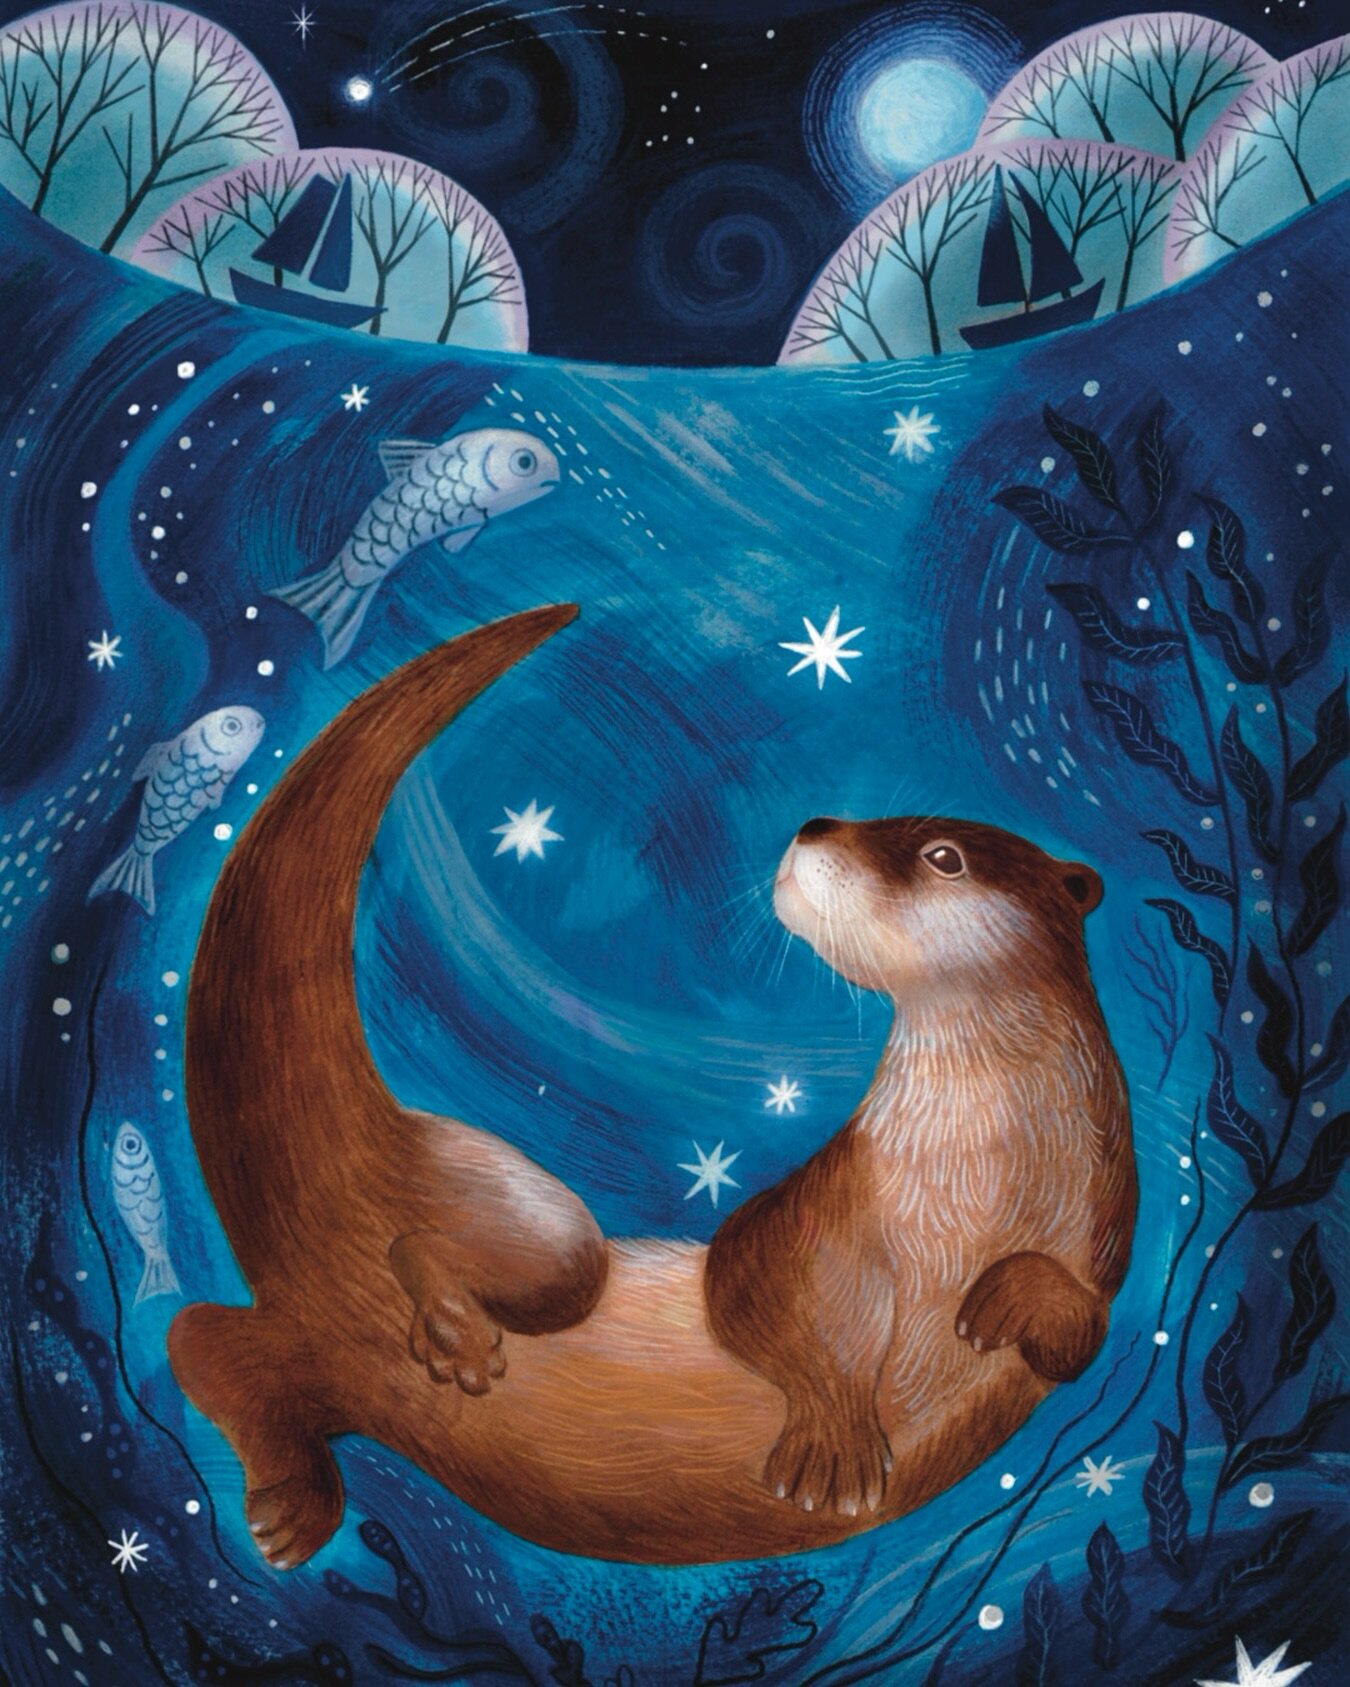 A fun otter painting from last week- this one in acrylic gouache with neocolor crayons. Posting this one from the glorious wet and windy seaside town of Hastings so most appropriate! I live in one of the furthest points from the uk to the sea in rura